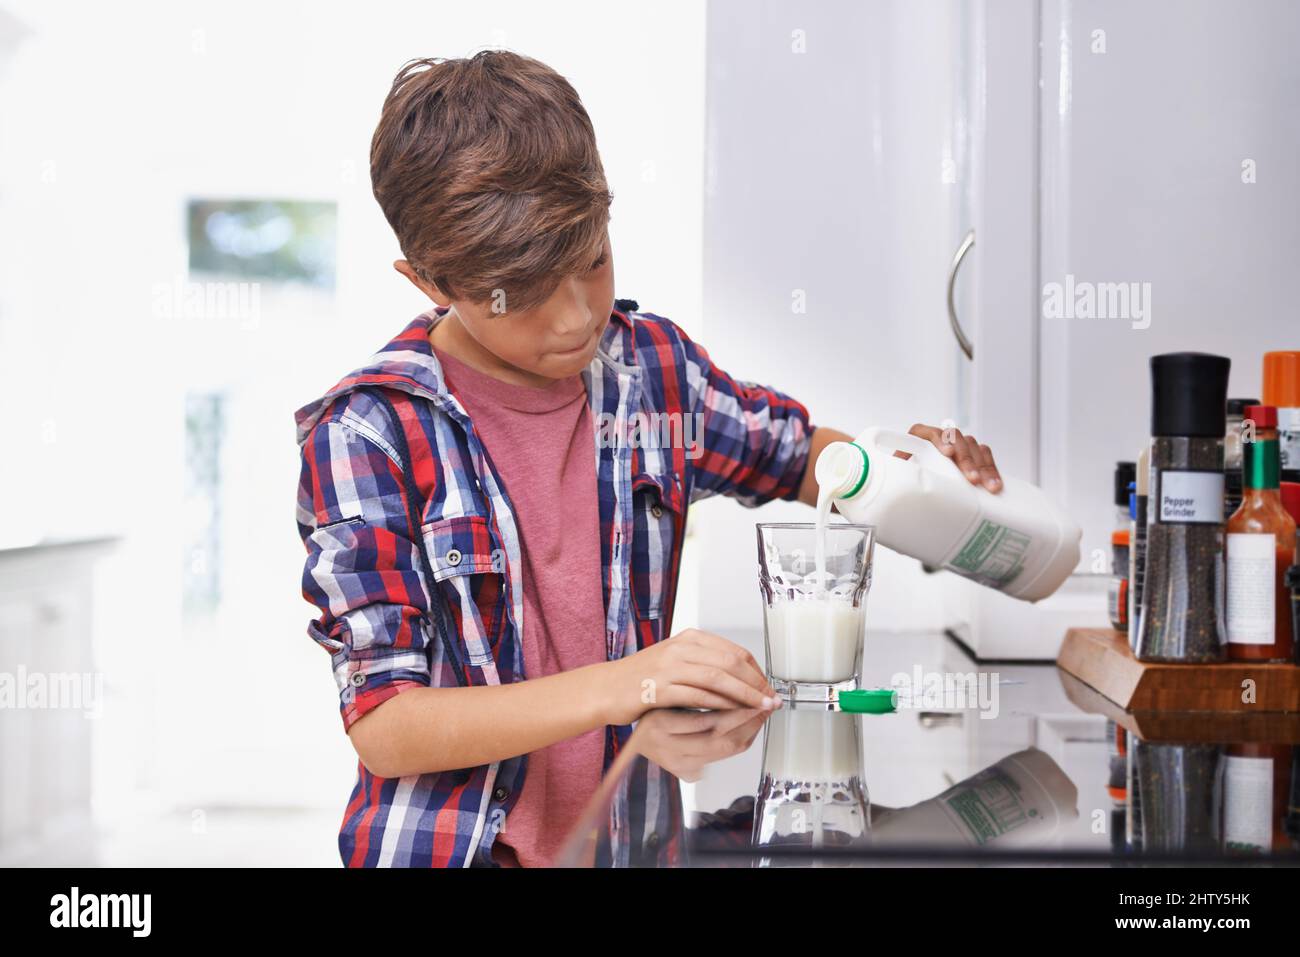 Healthy choices from a young age. A young boy pouring himself a glass of milk in the kitchen. Stock Photo